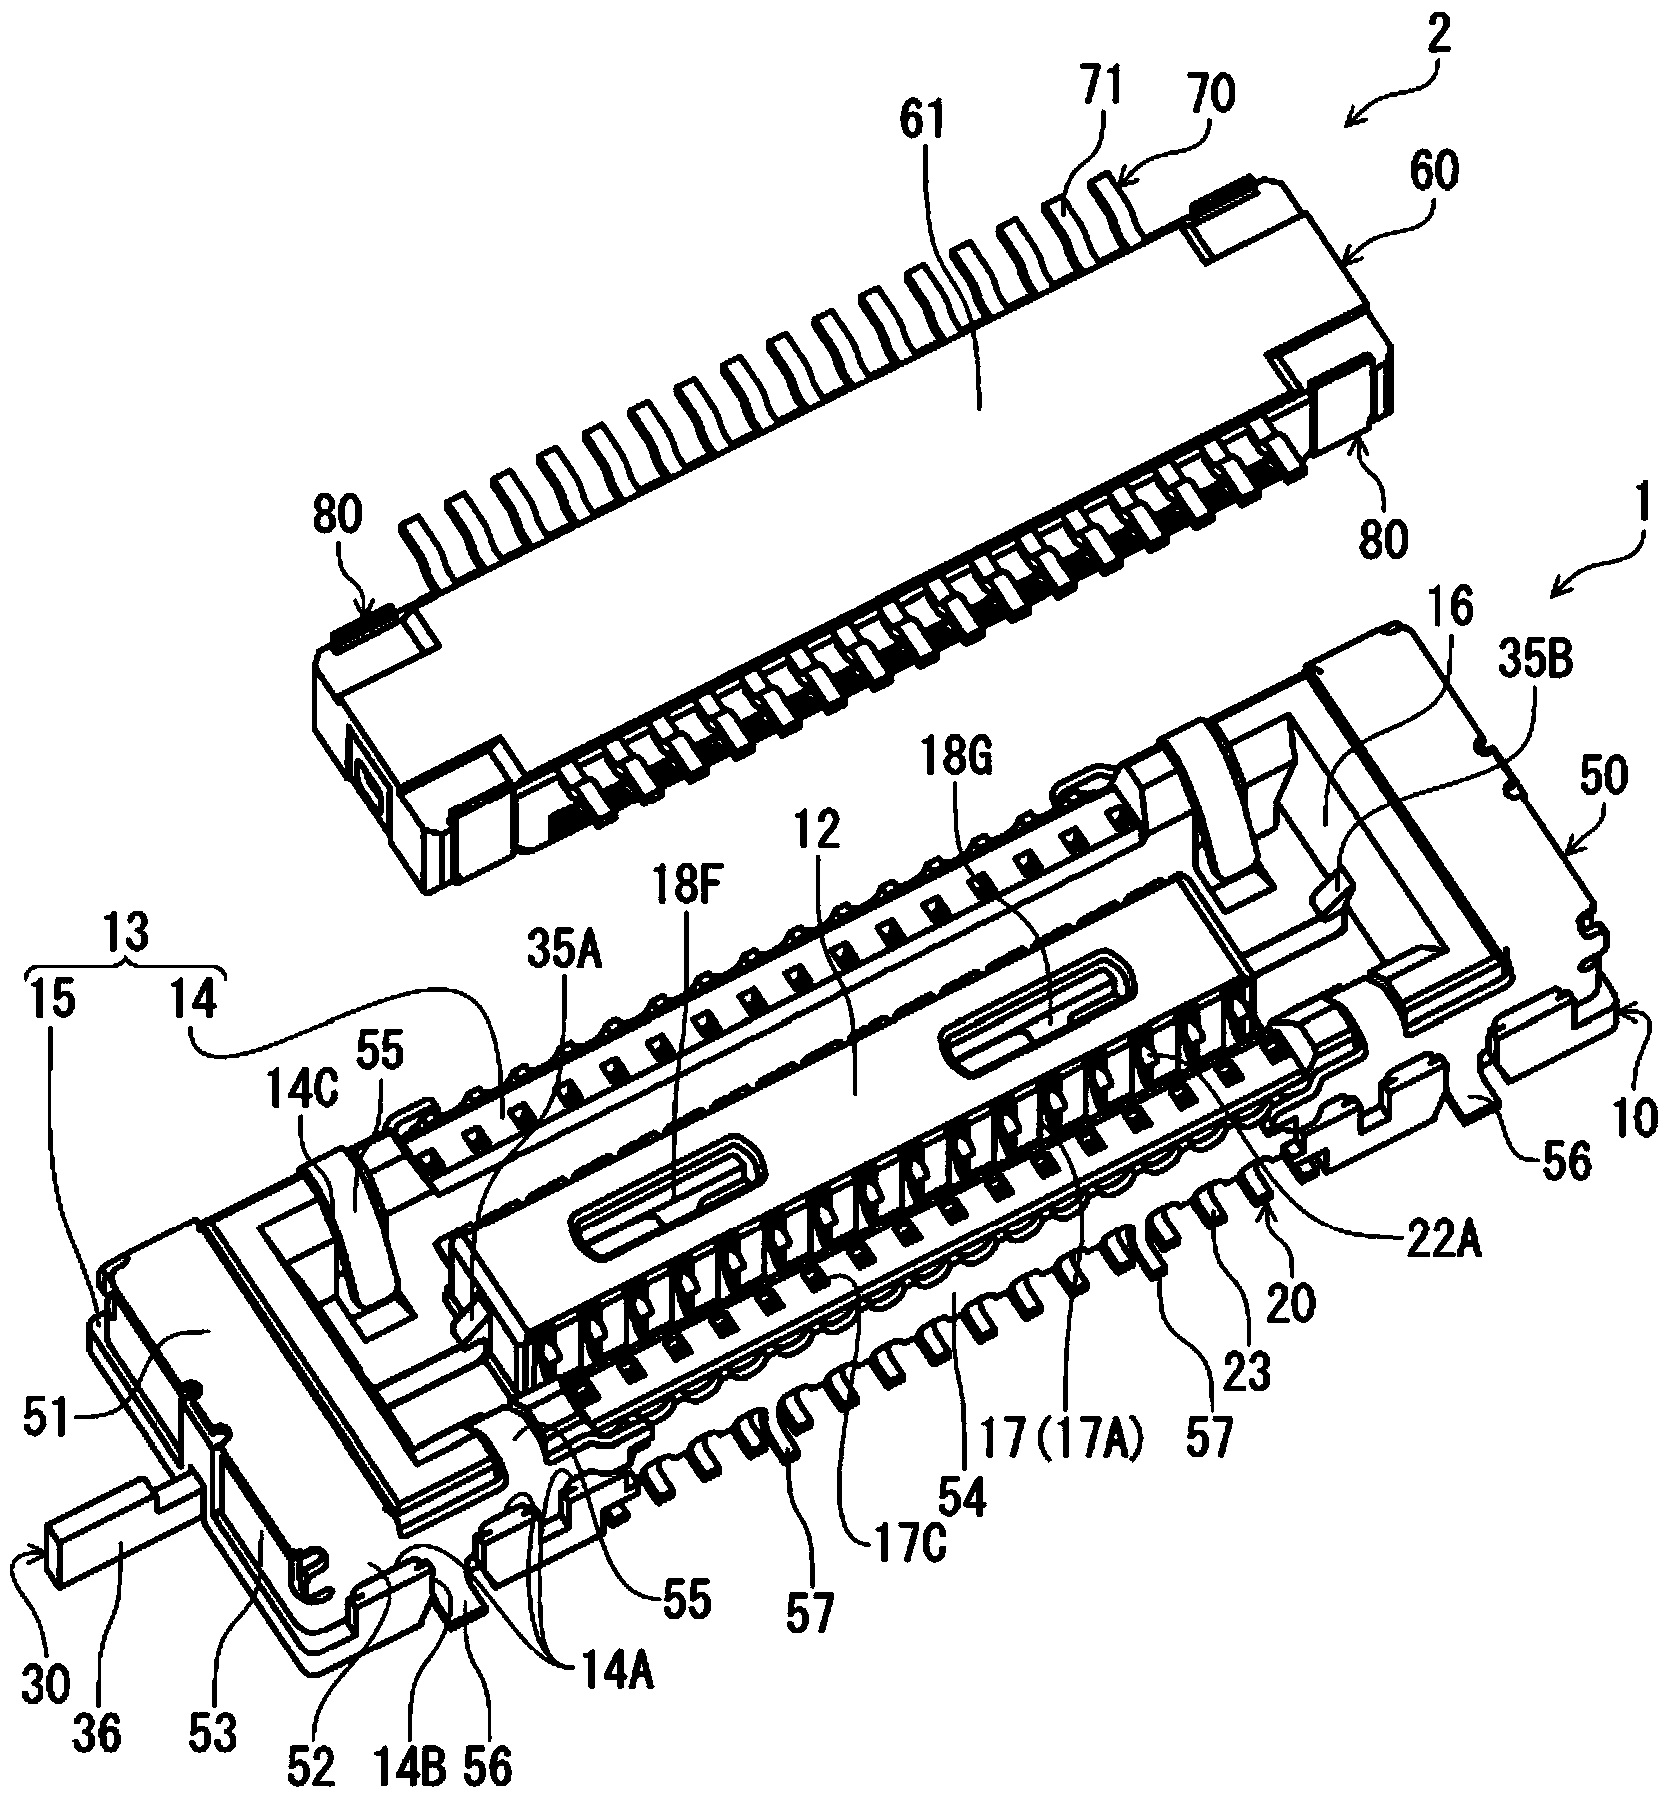 Electric connector for circuit board and electric connector assembly